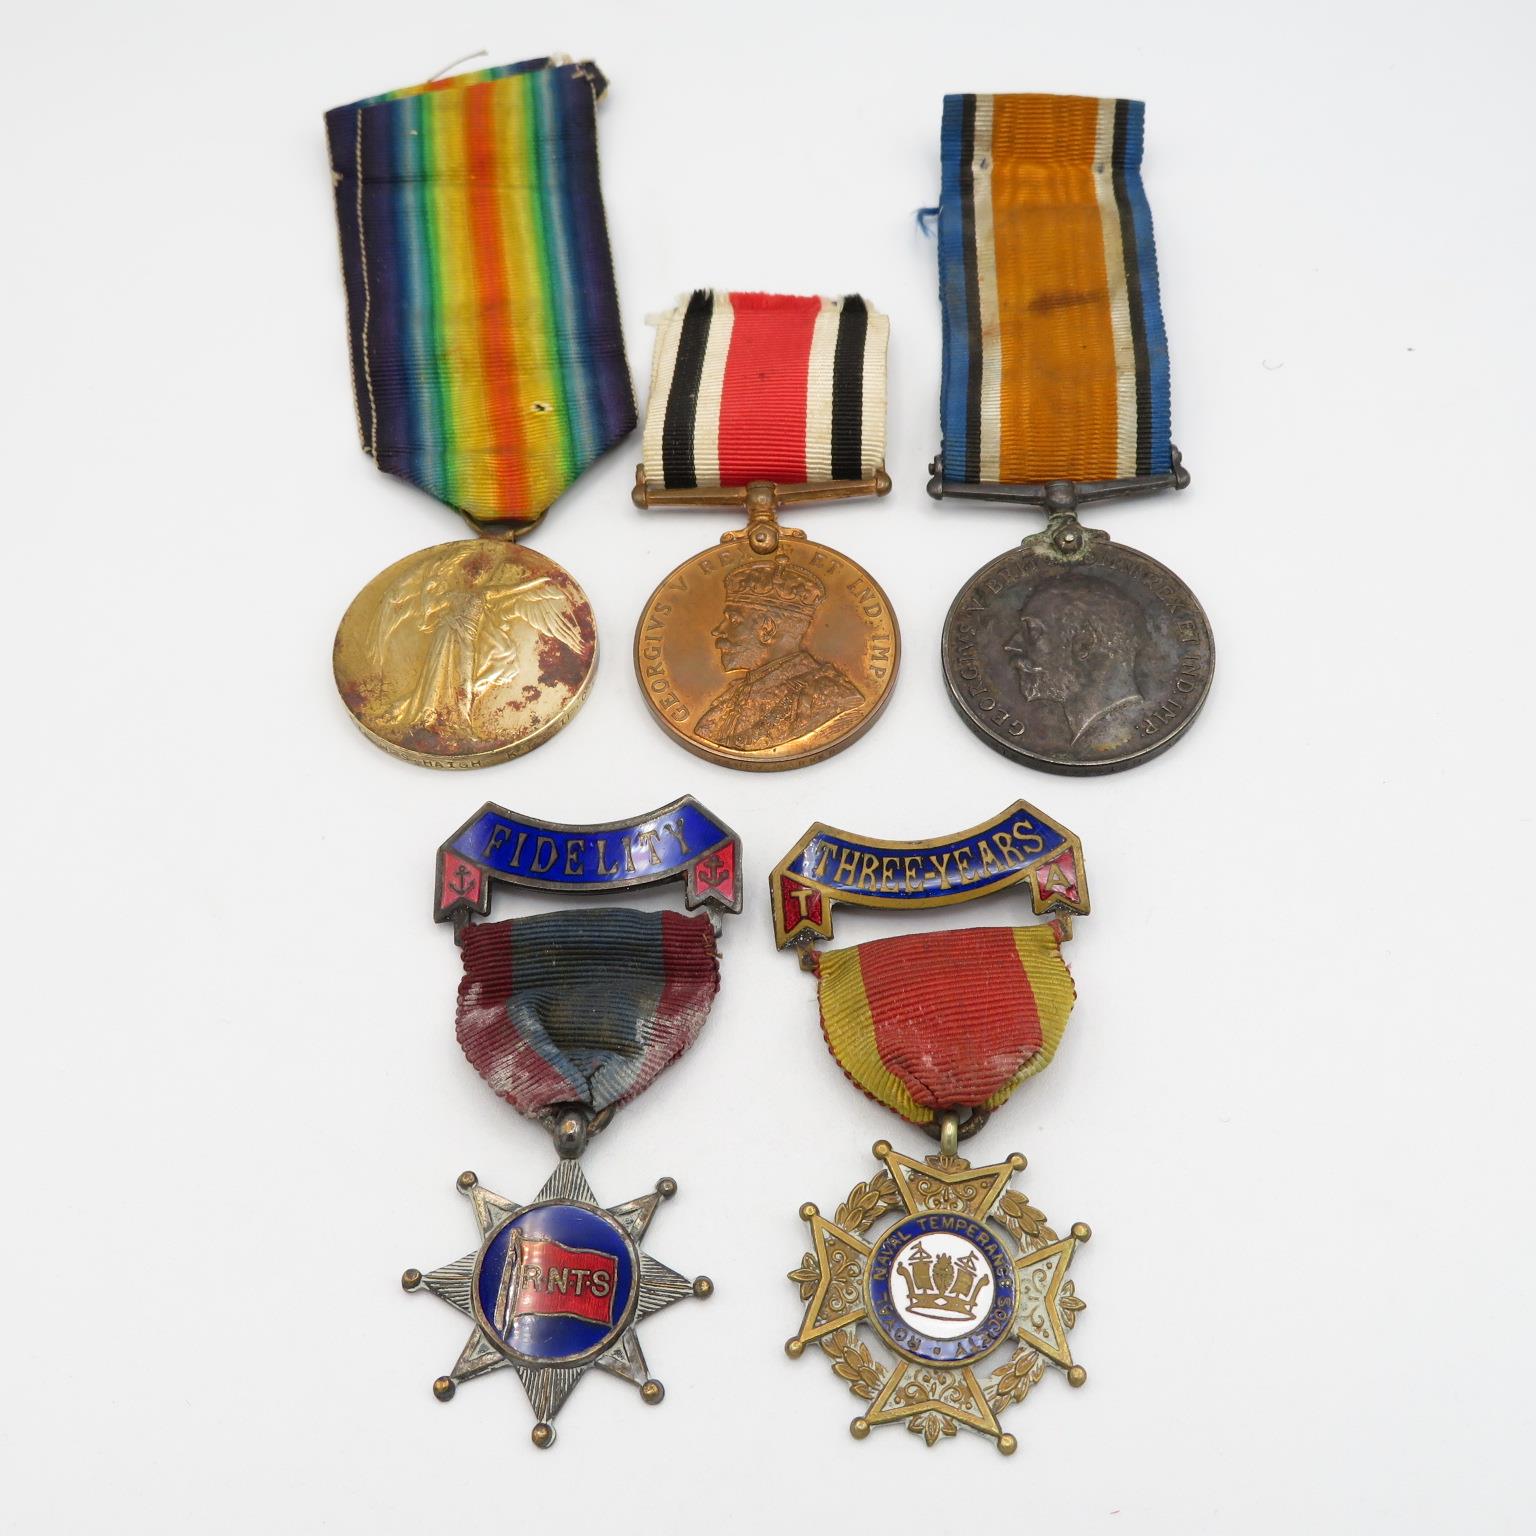 5x WWI GV medals inc. WWI pair to R-20457 Pts WS Haigh K.R.R.C. Special Constabulary Henry Barker -